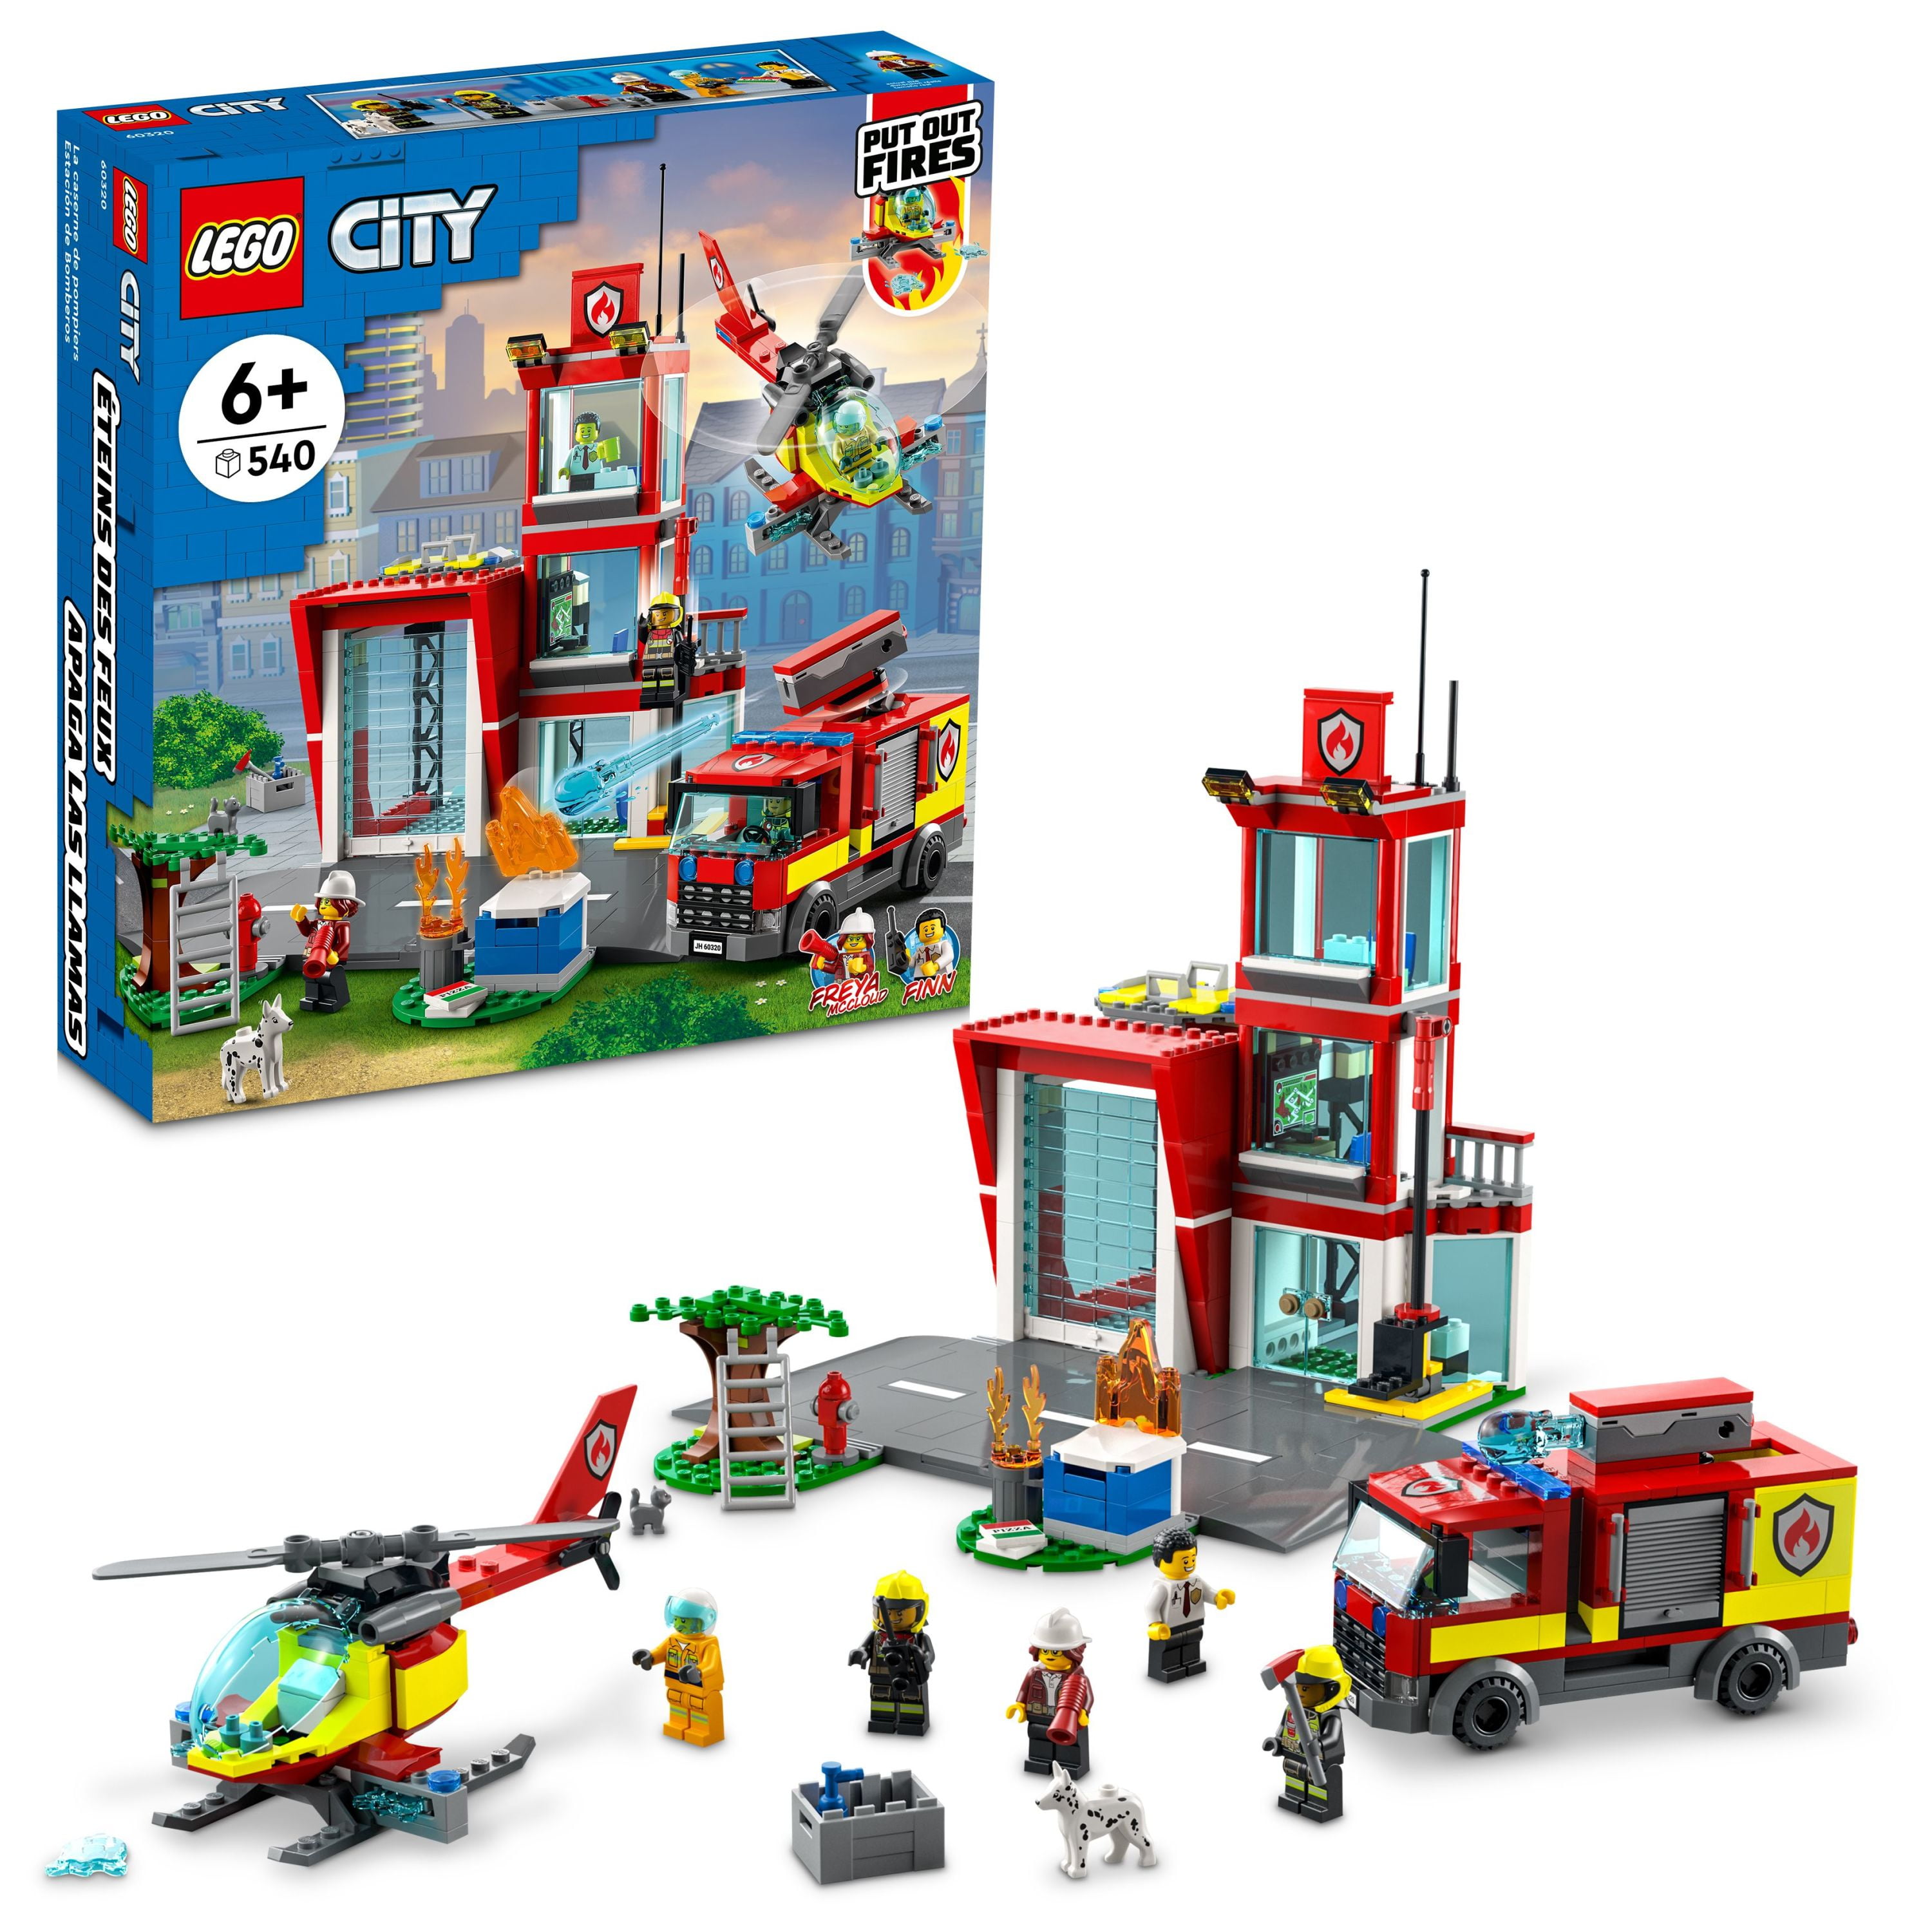 LEGO City Fire Station Set 60320 with Garage, & Fire Engine Toys plus Firefighter Minifigures, Emergency Gifts for Age 6 Plus - Walmart.com